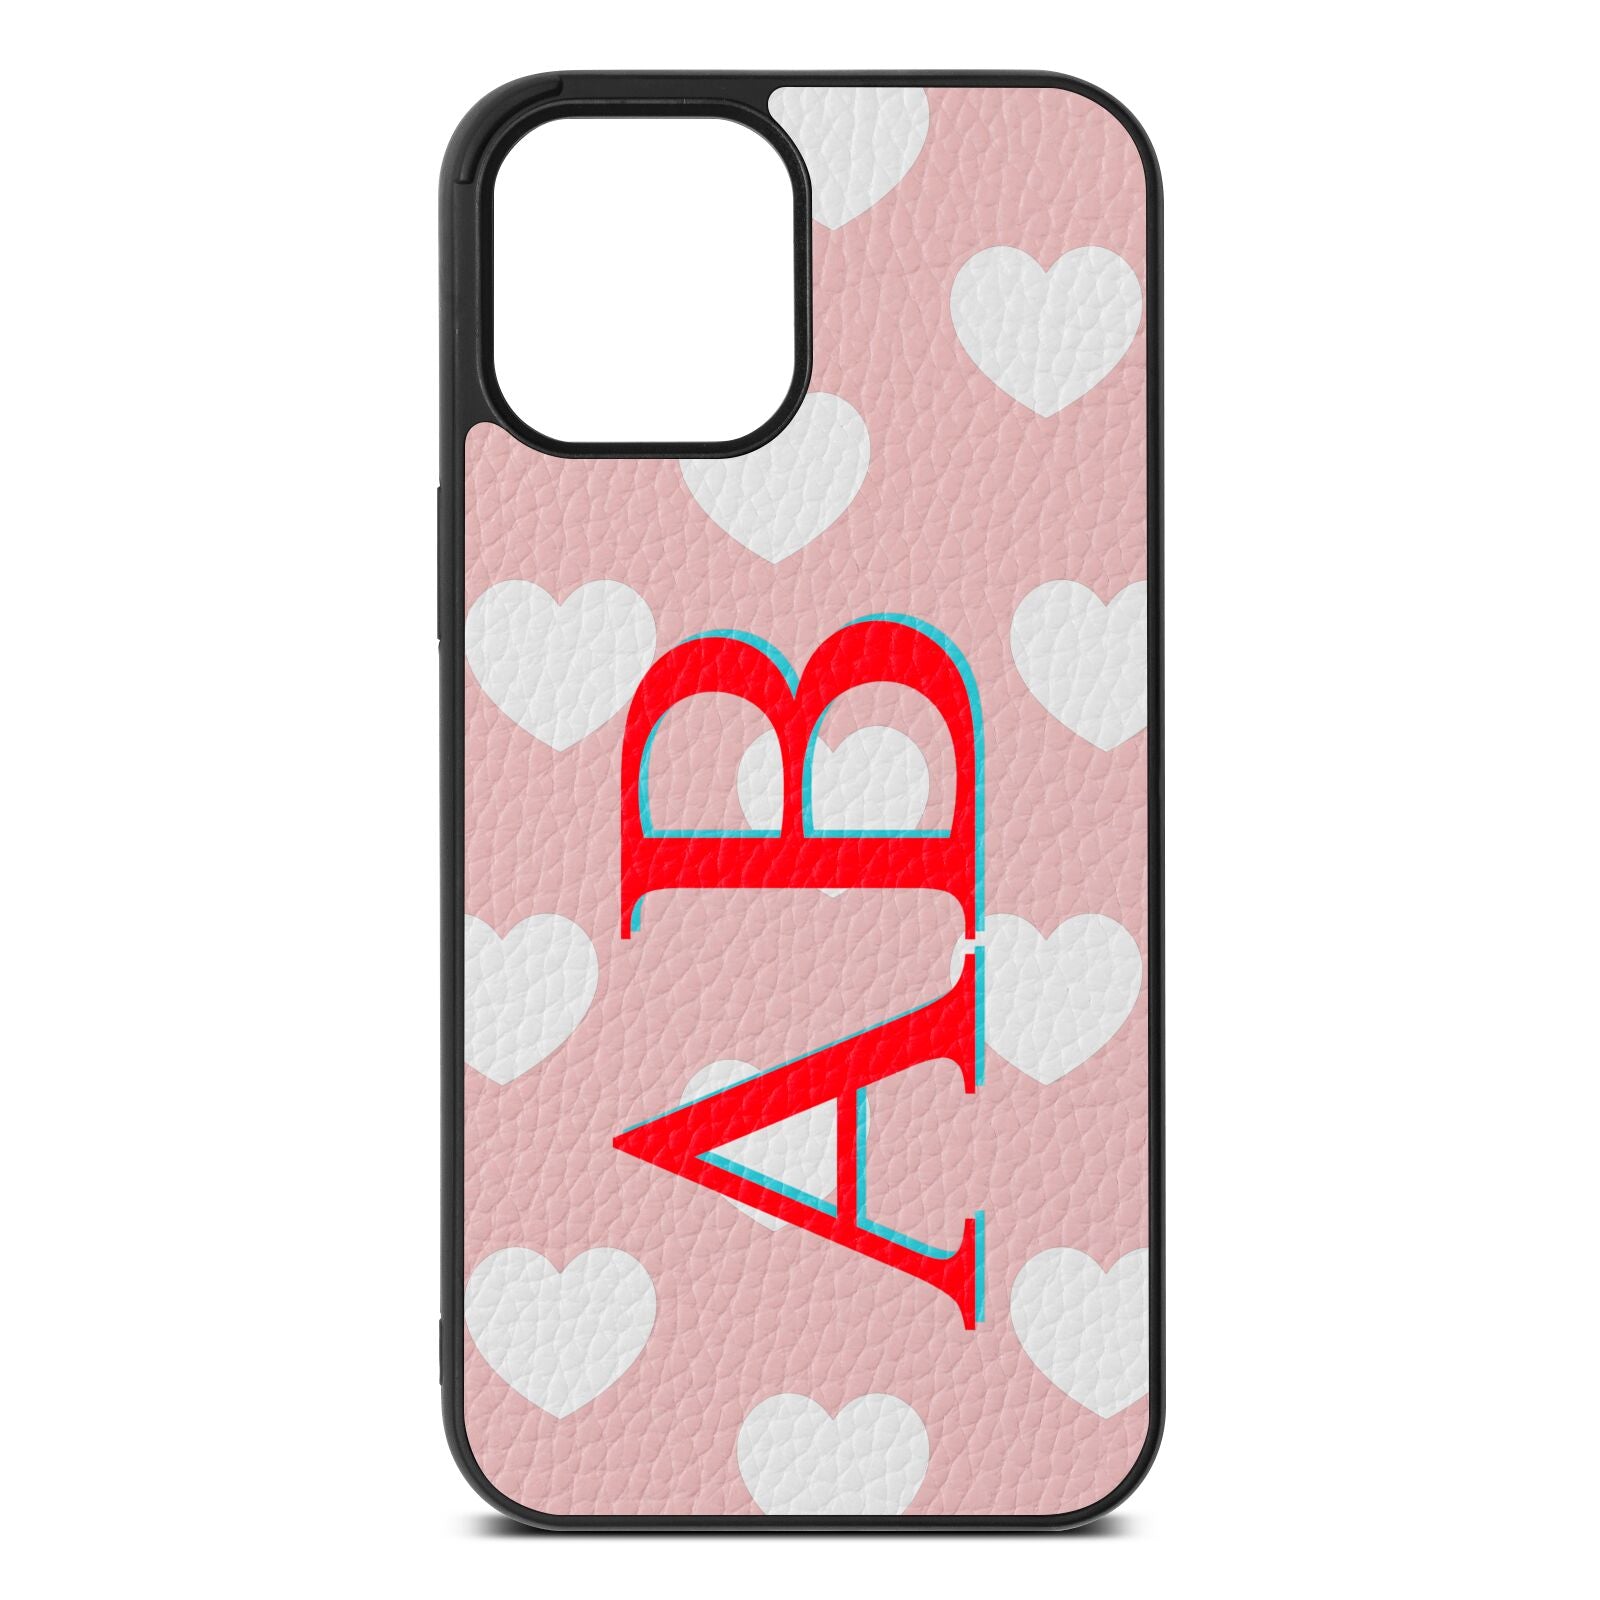 Heart Print Initials Pink Pebble Leather iPhone 12 Pro Max Case